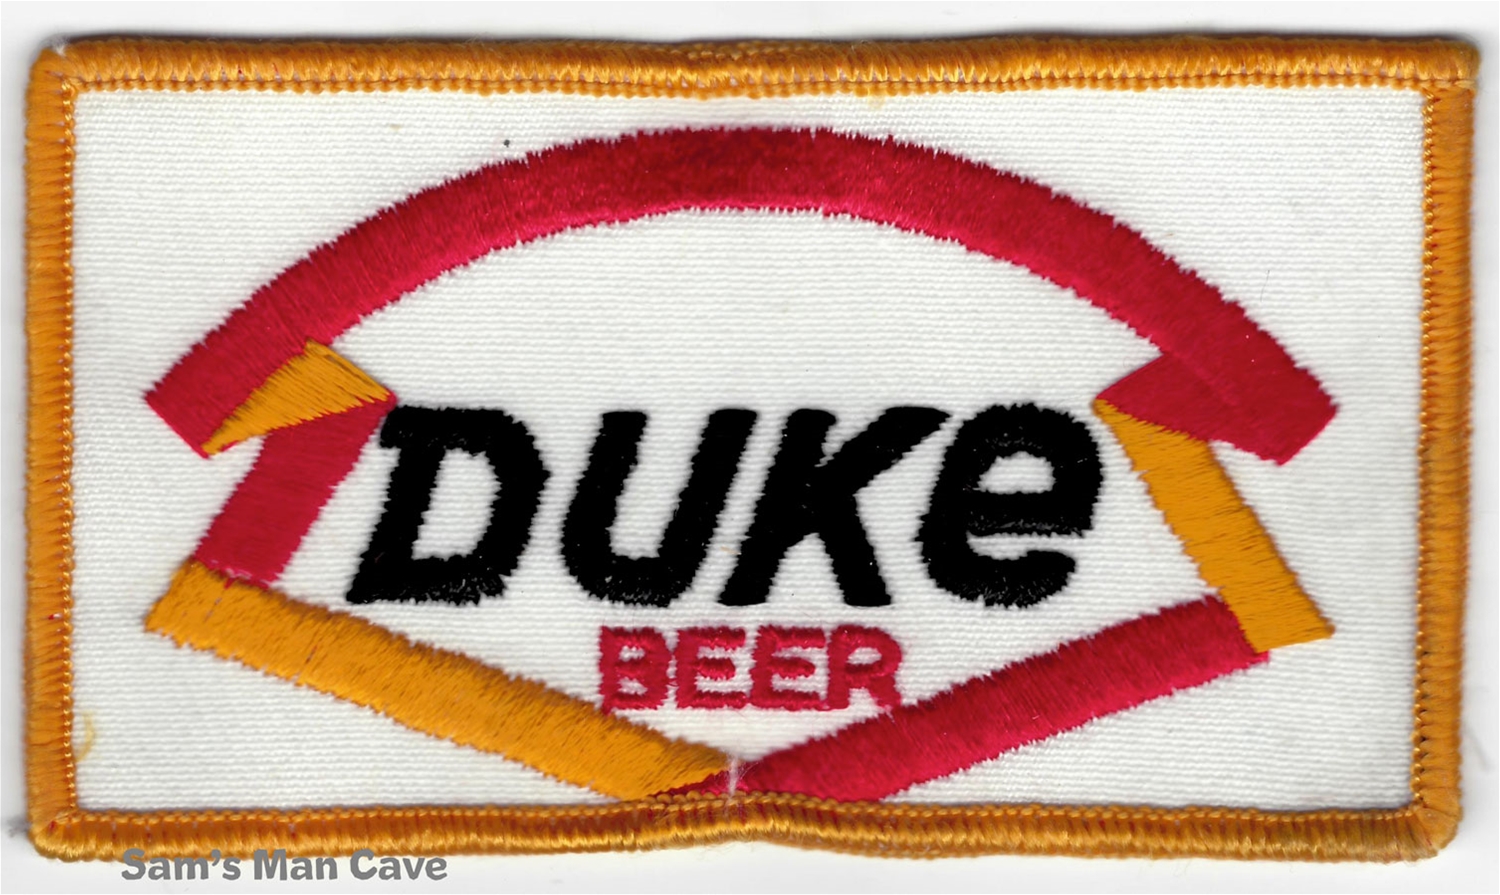 Duke Beer Patch